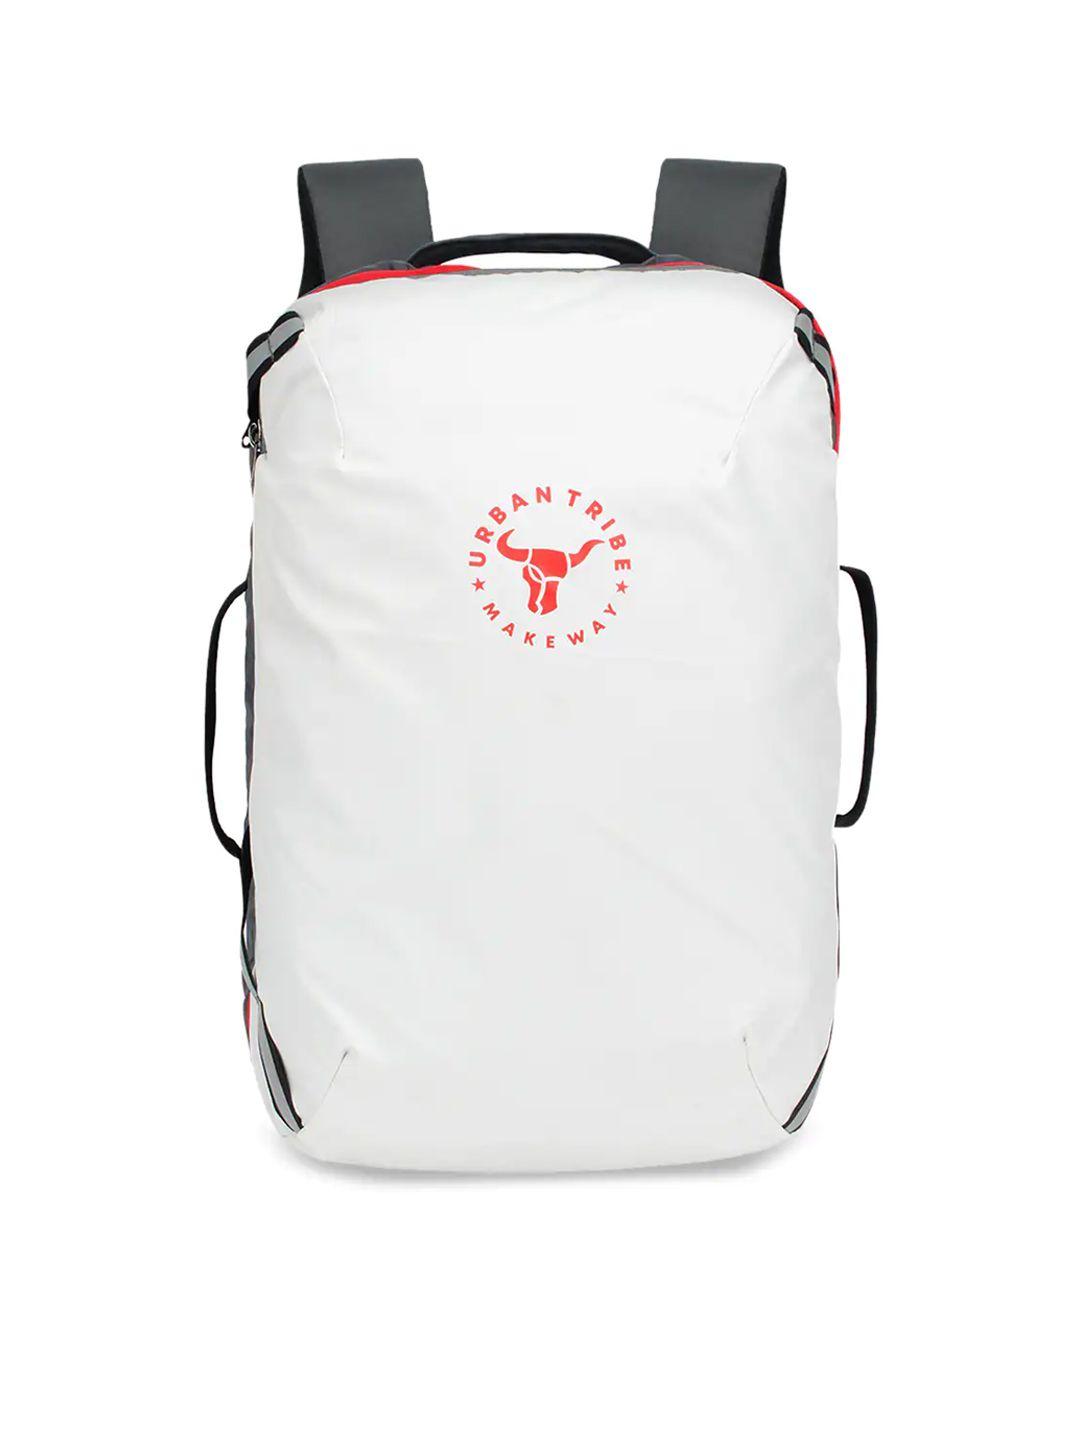 urban tribe adult white & grey water repellent brand logo printed backpack